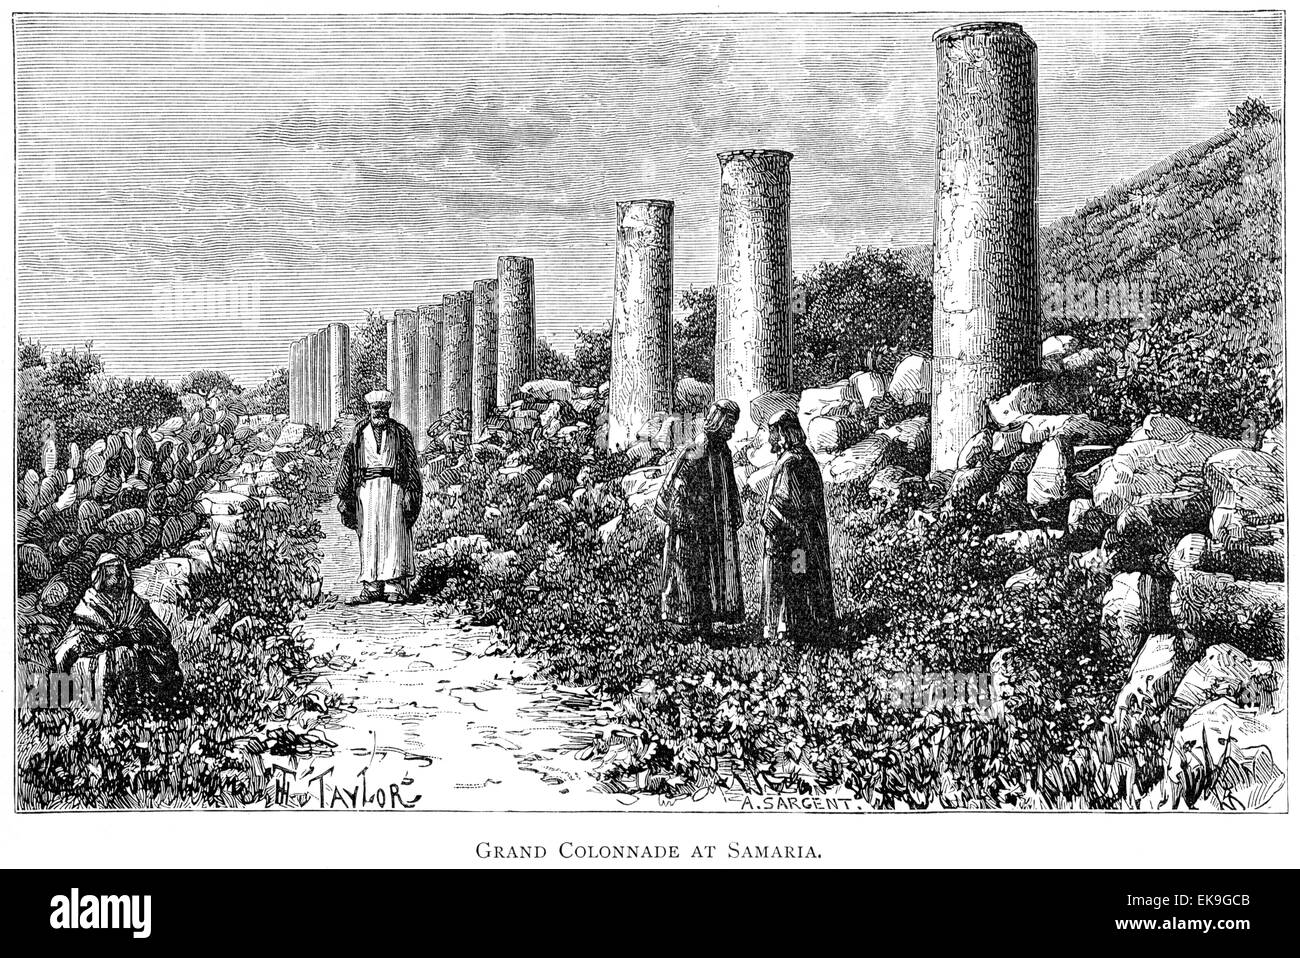 An engraving of the Grand Colonnade at Samaria scanned at high resolution from a book printed in 1889. Stock Photo